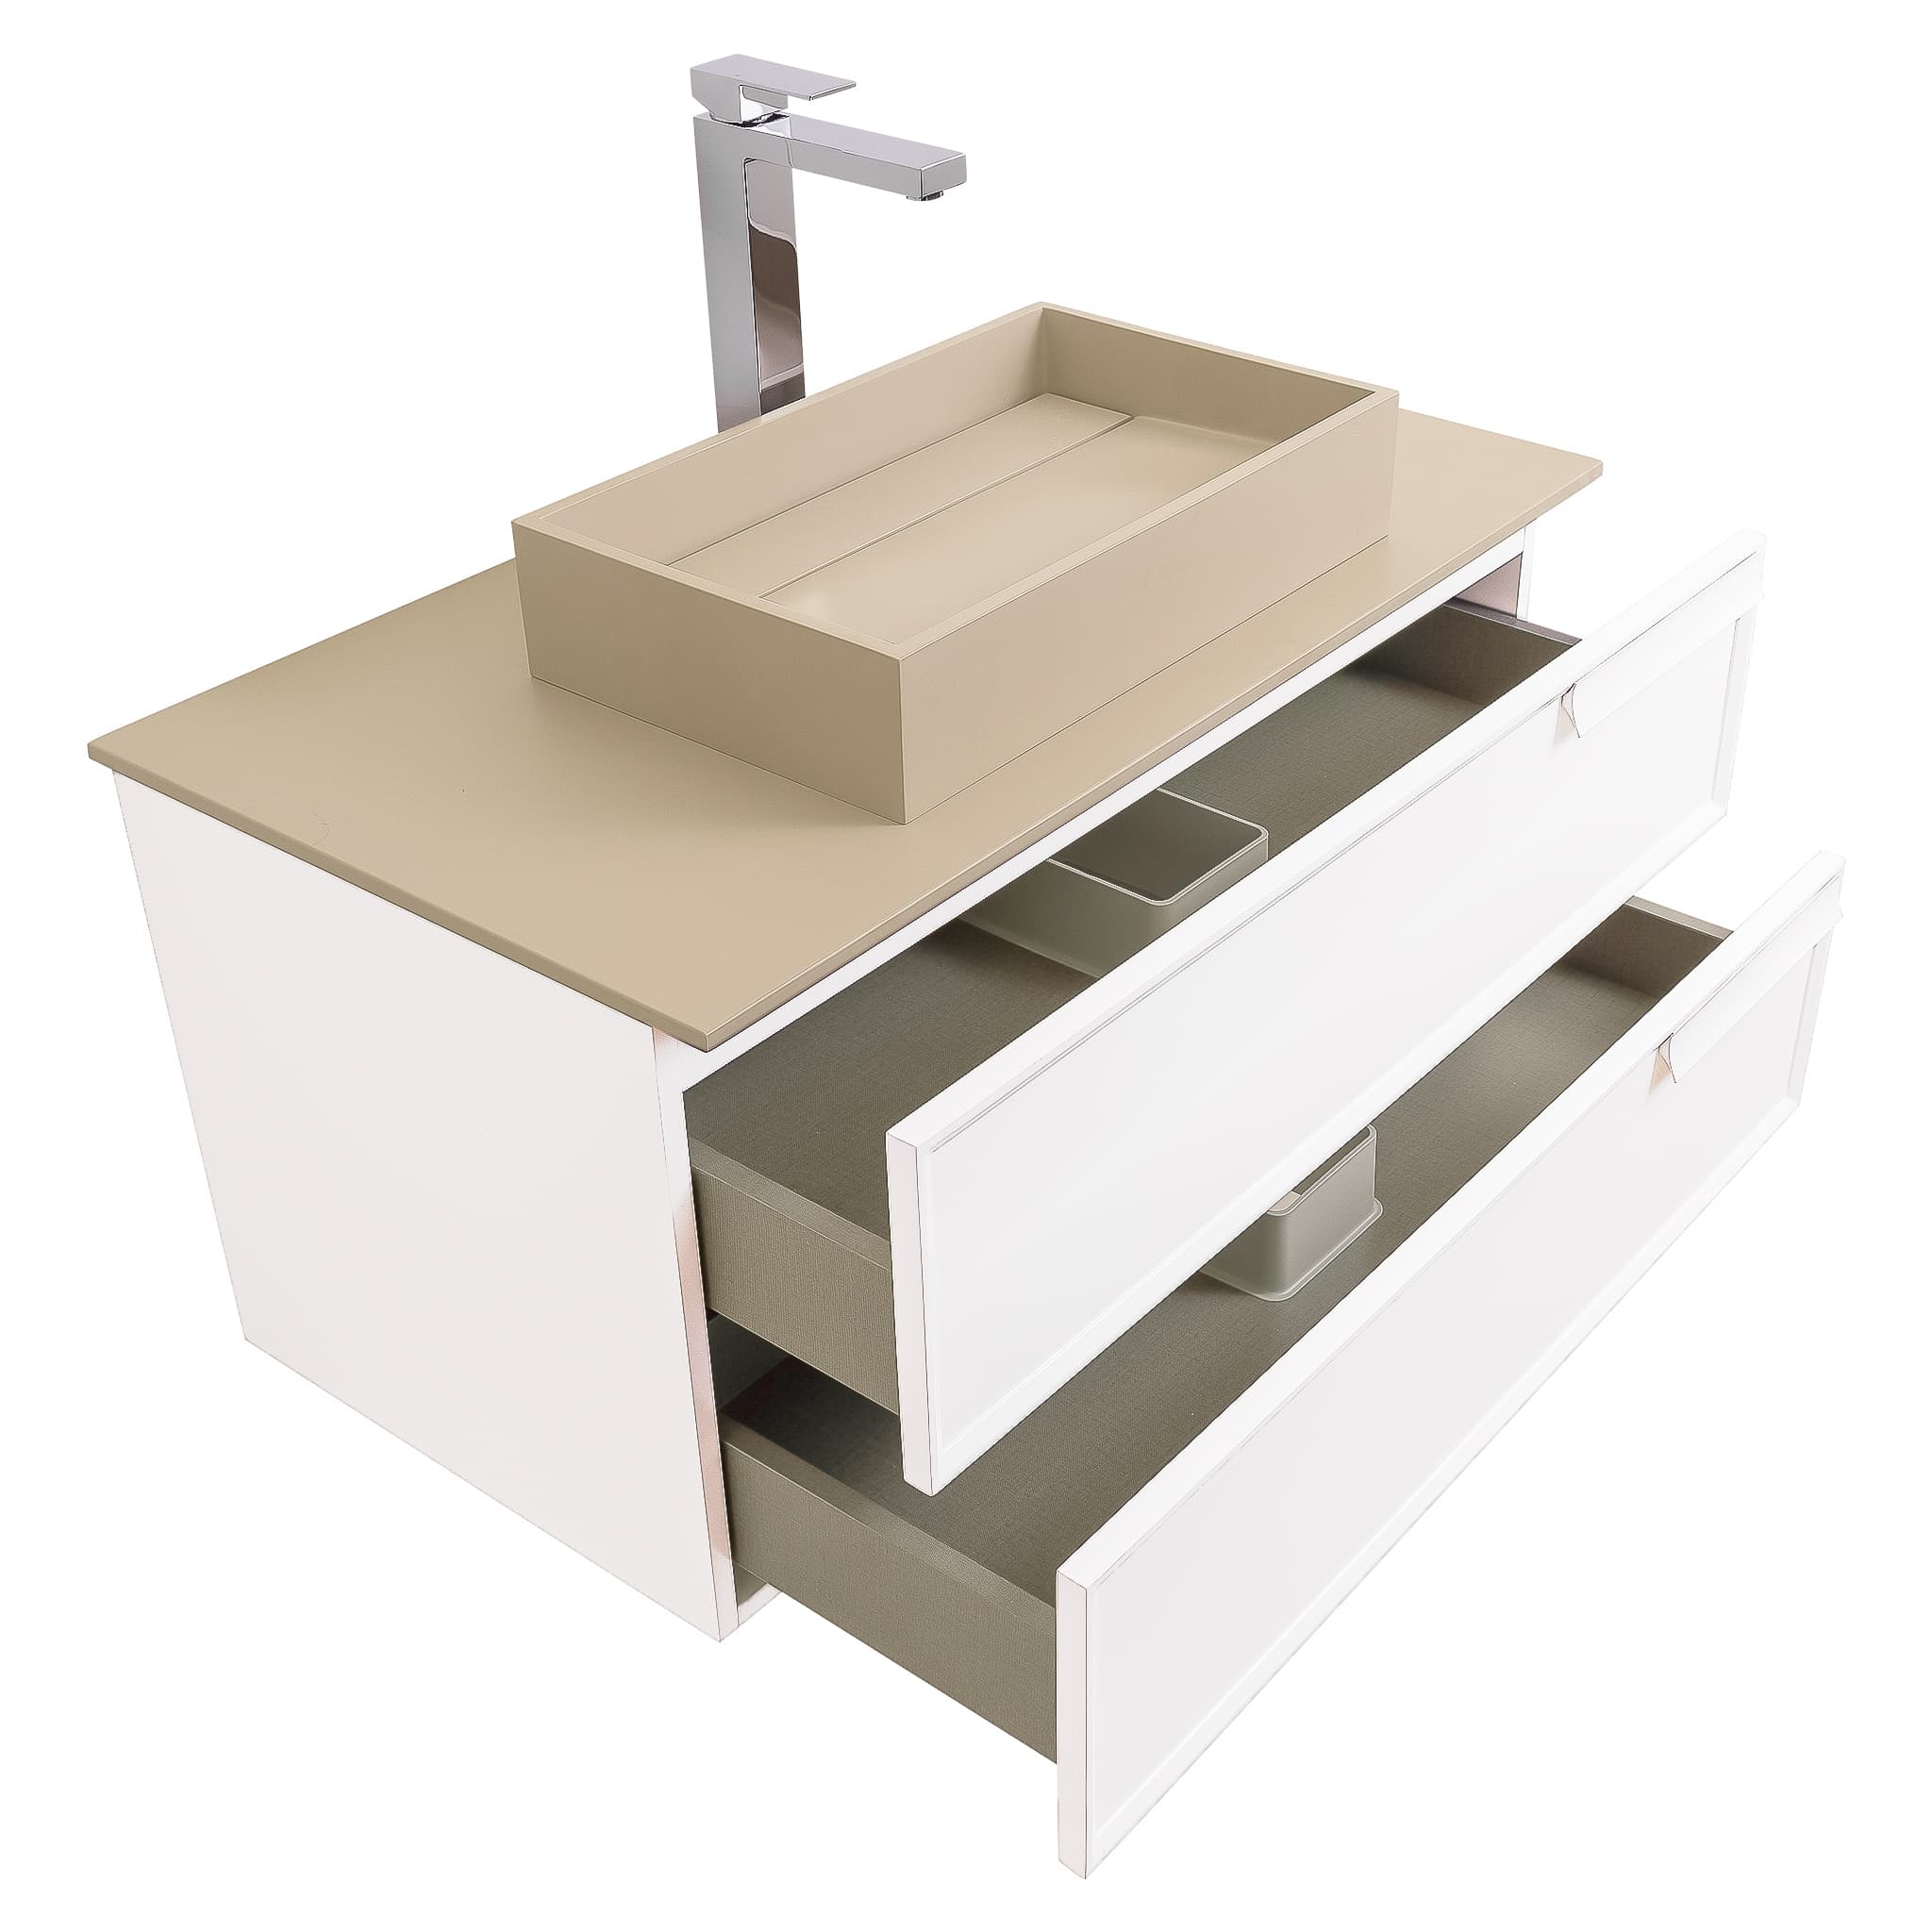 Garda 39.5 Matte White Cabinet, Solid Surface Flat Taupe Counter and Infinity Square Solid Surface Taupe Basin 1329, Wall Mounted Modern Vanity Set